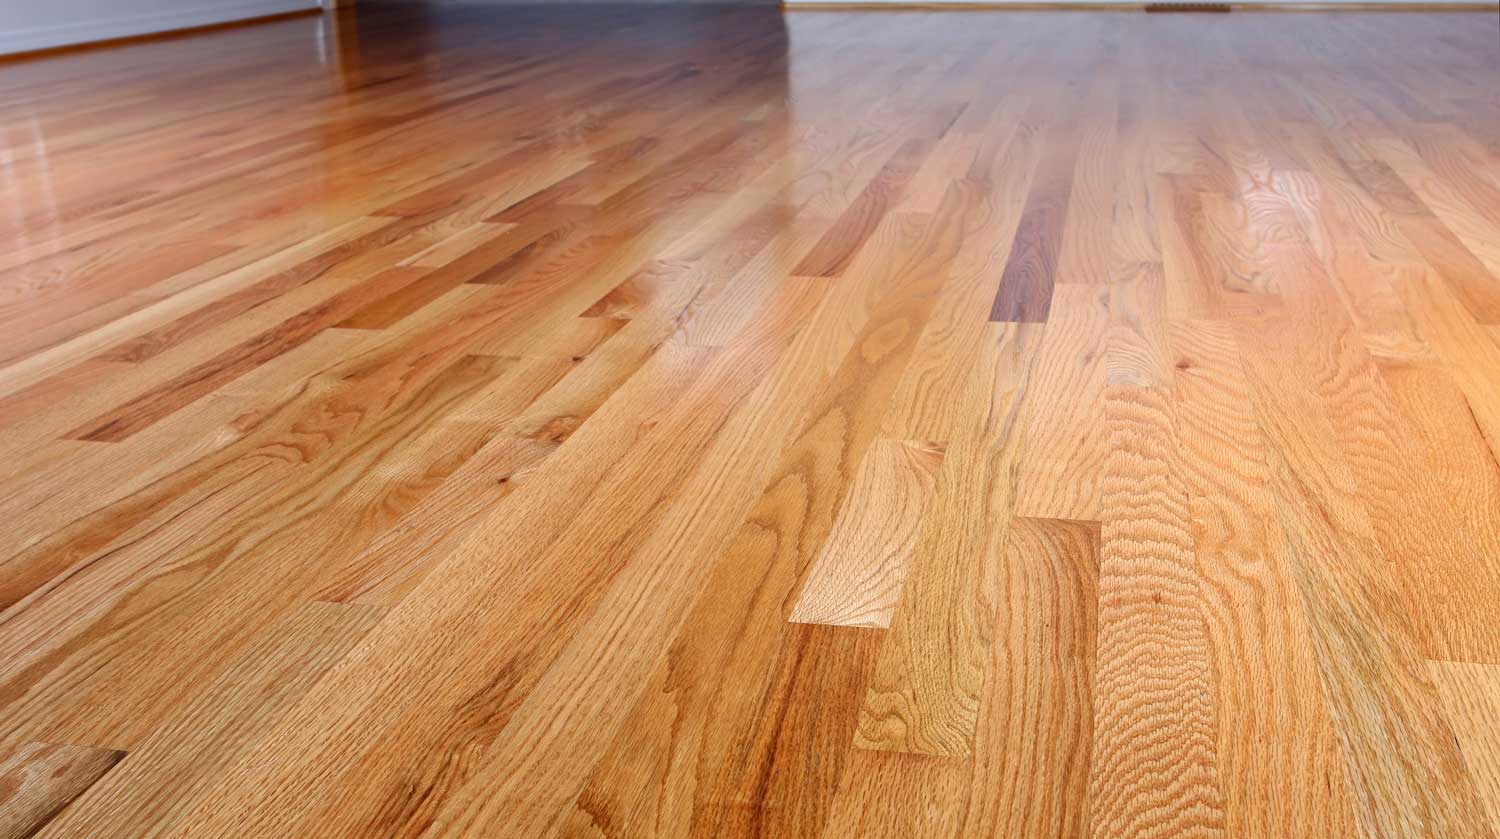 Cost To Refinish A Hardwood Floor, How Much Per Sq Ft To Refinish Hardwood Floors